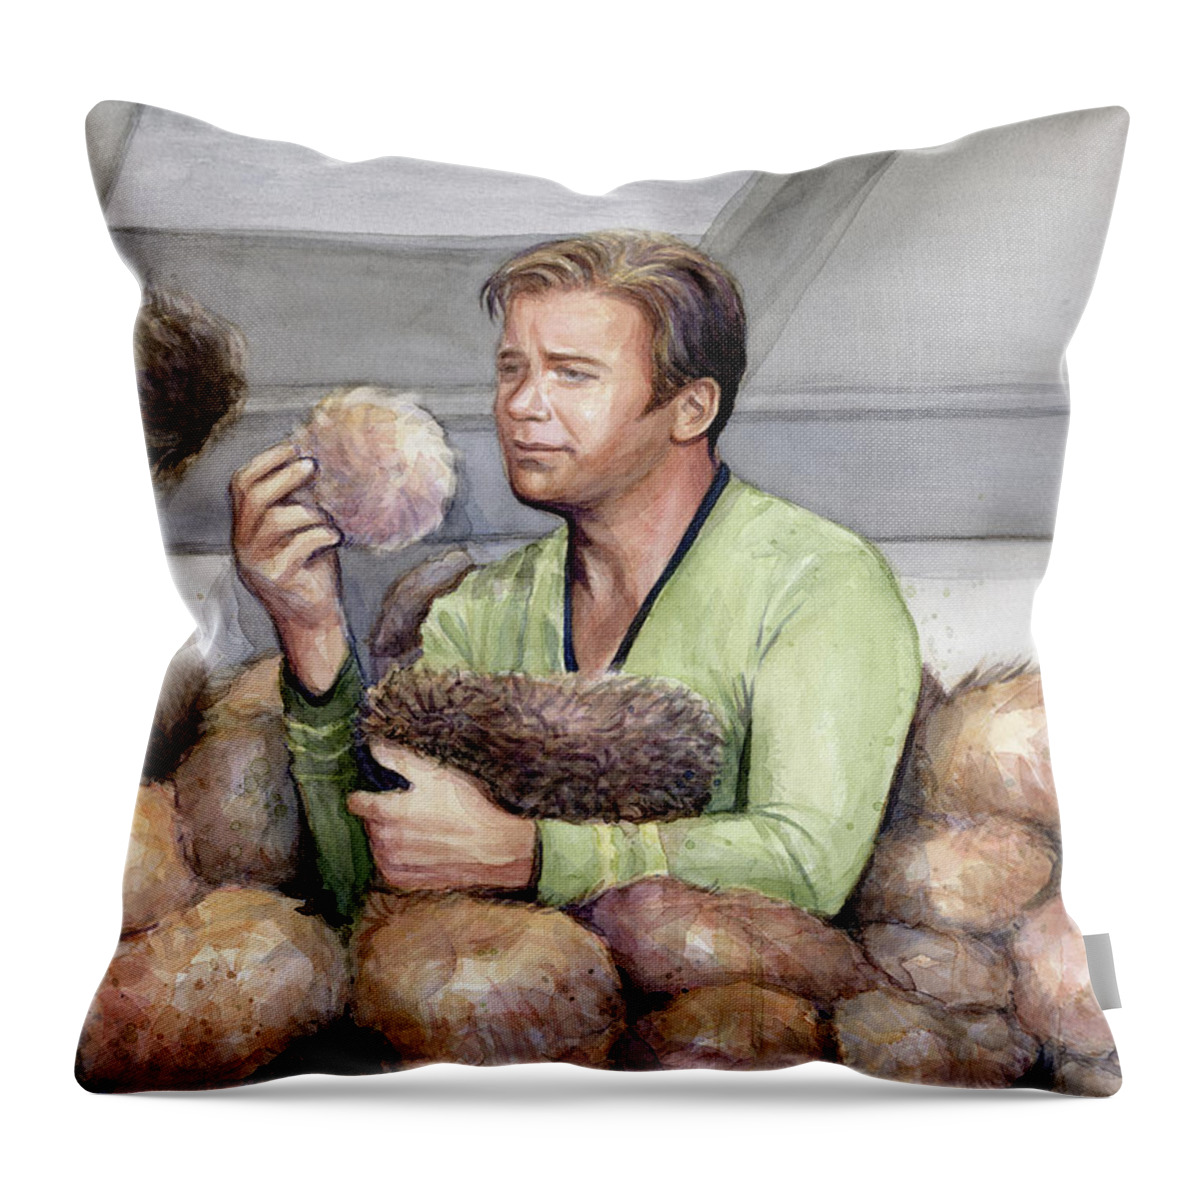 Star Trek Throw Pillow featuring the painting Captain Kirk and Tribbles by Olga Shvartsur